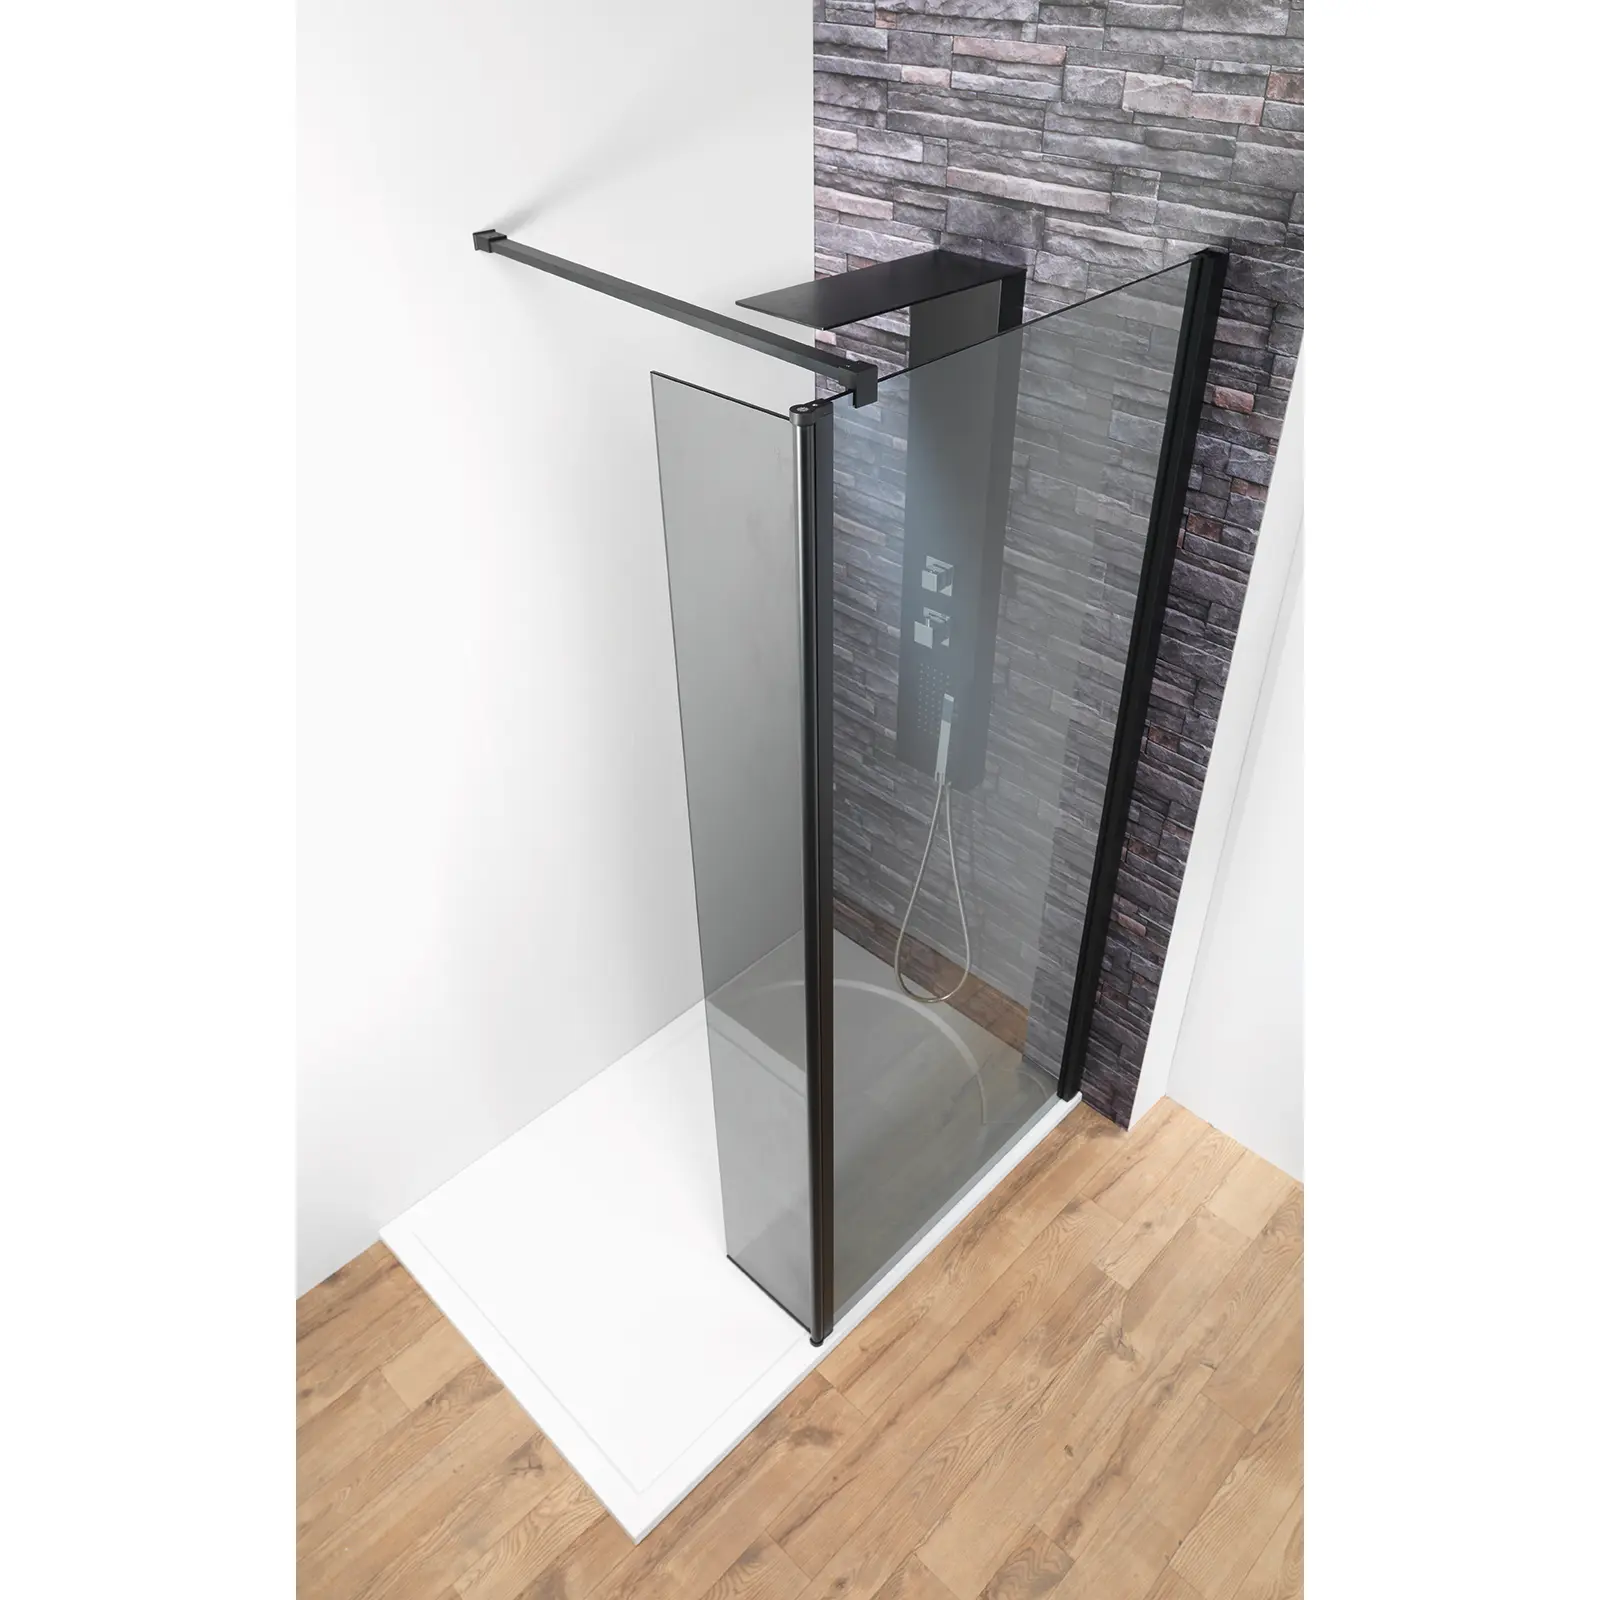 smoked glass shower screen with flipper panel - What is a shower flipper panel